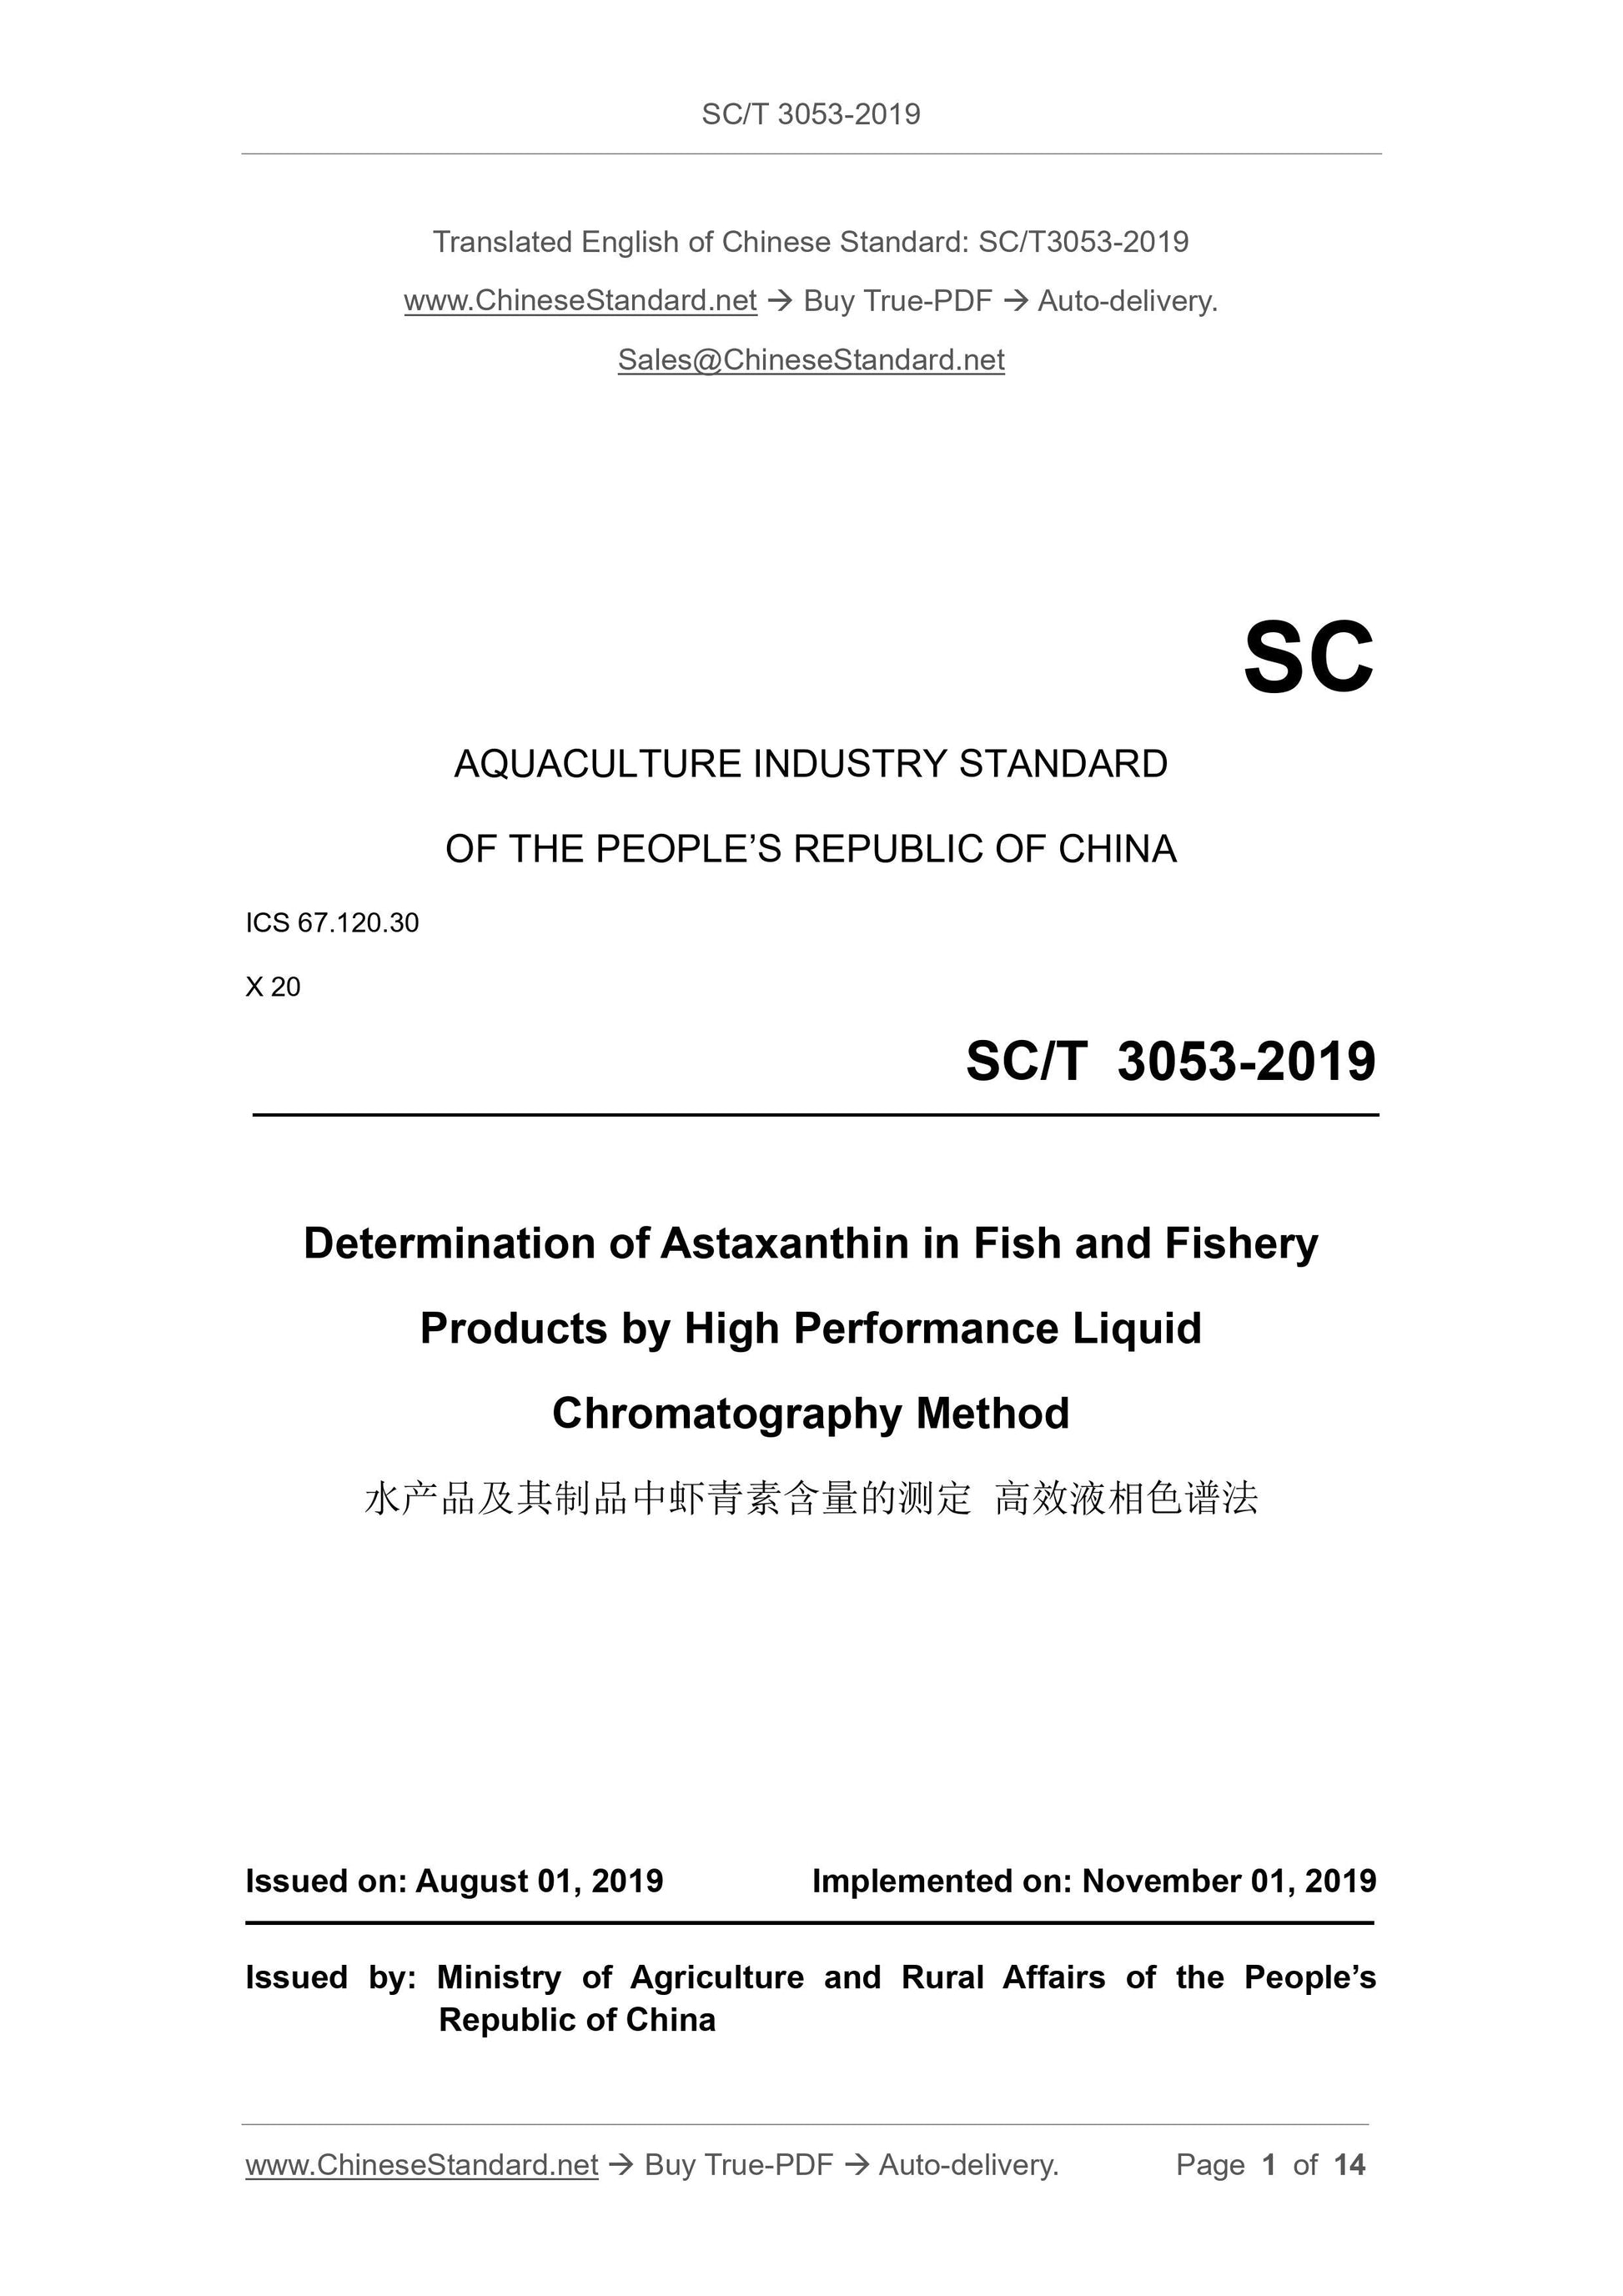 SC/T 3053-2019 Page 1